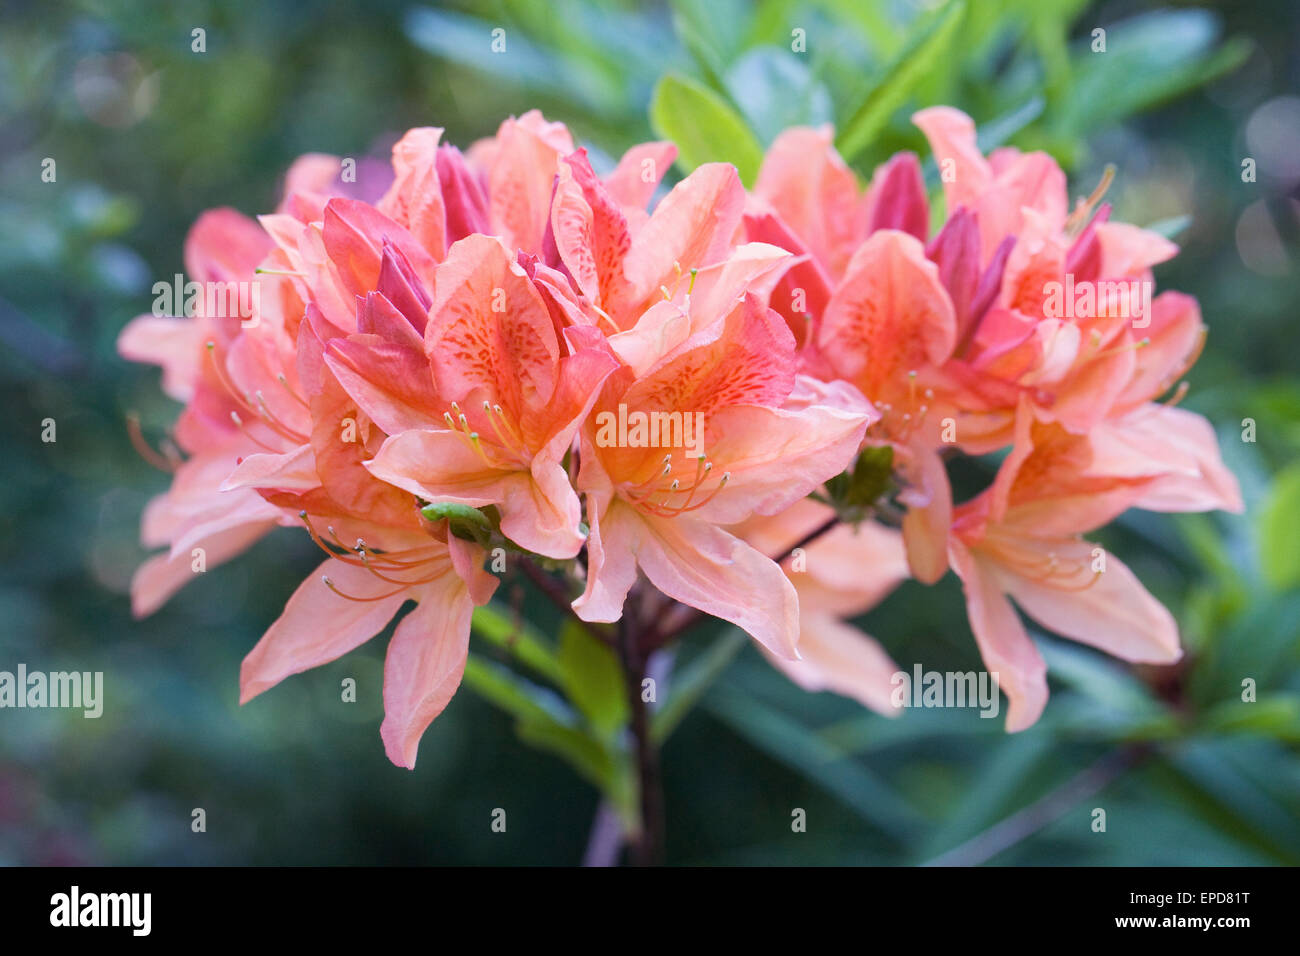 Rhododendron 'Salmon Queen' flowers. Stock Photo